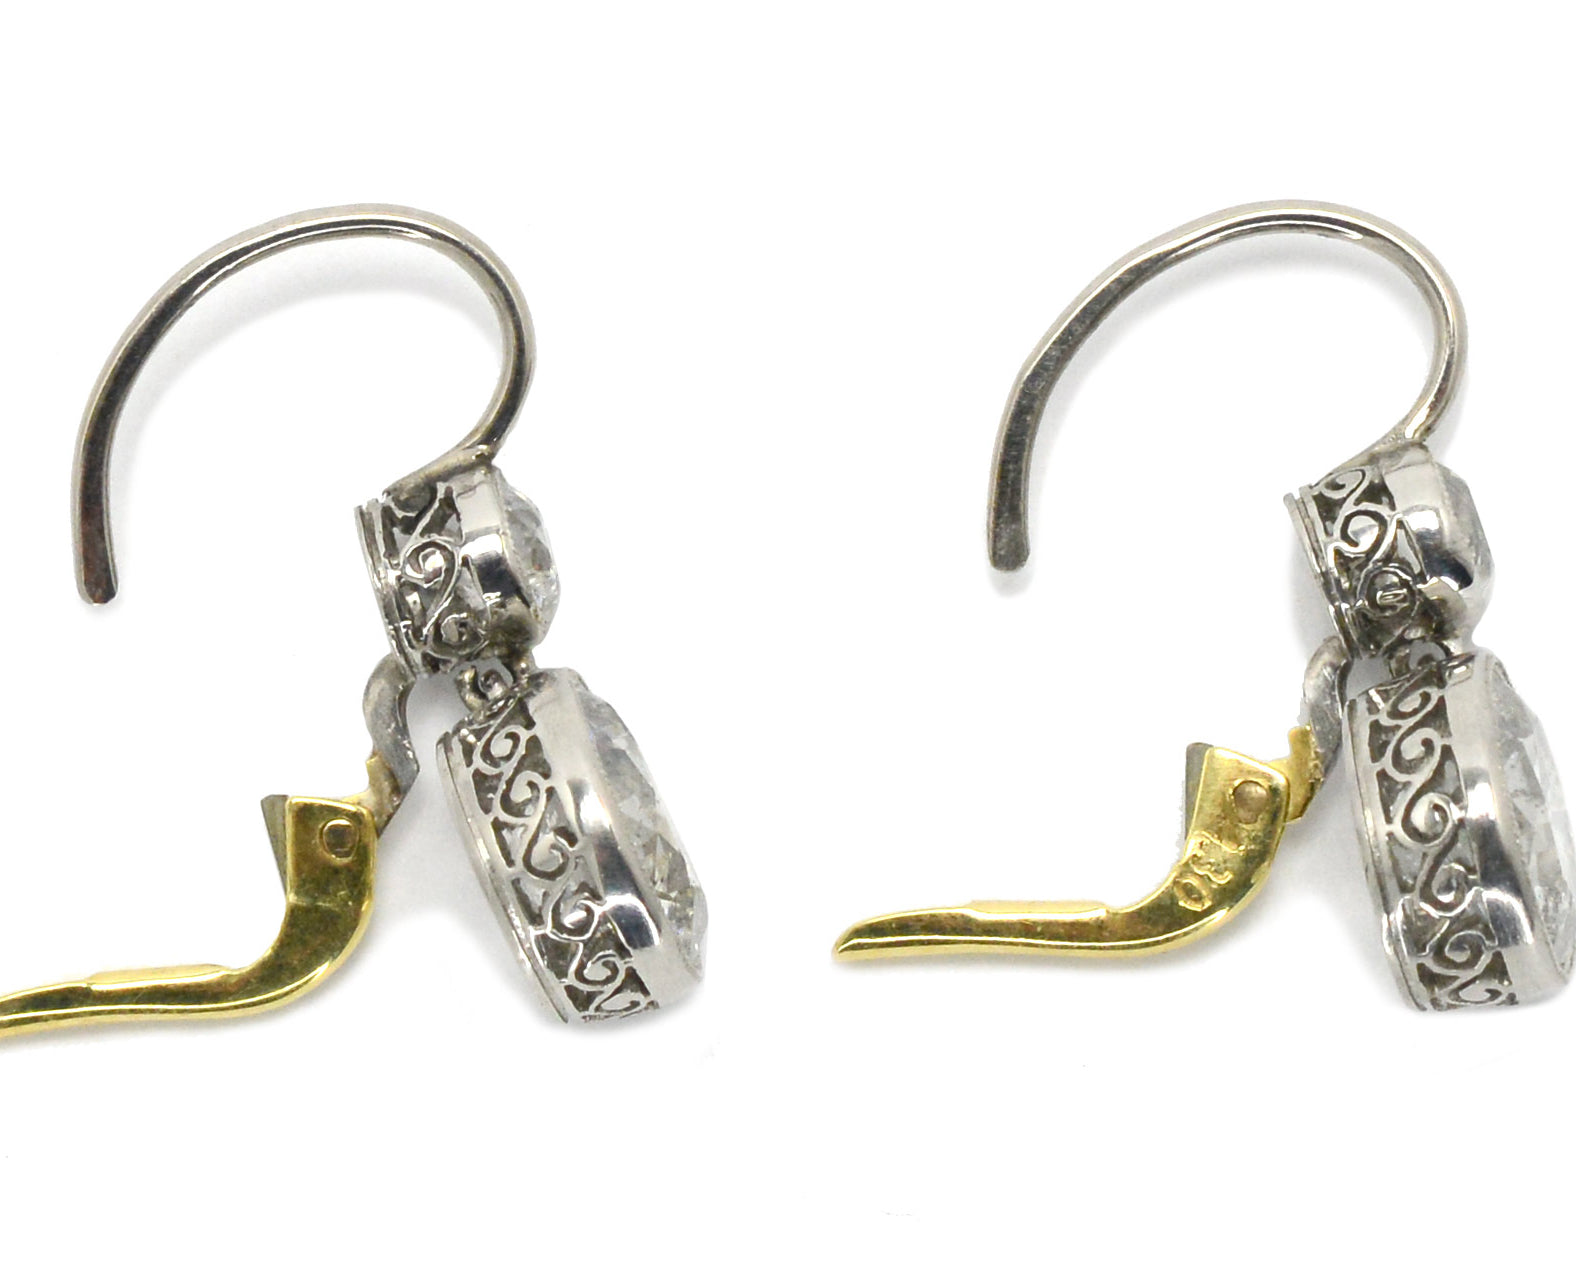 Two tone Edwardian revival earrings crafted of both platinum and yellow gold.